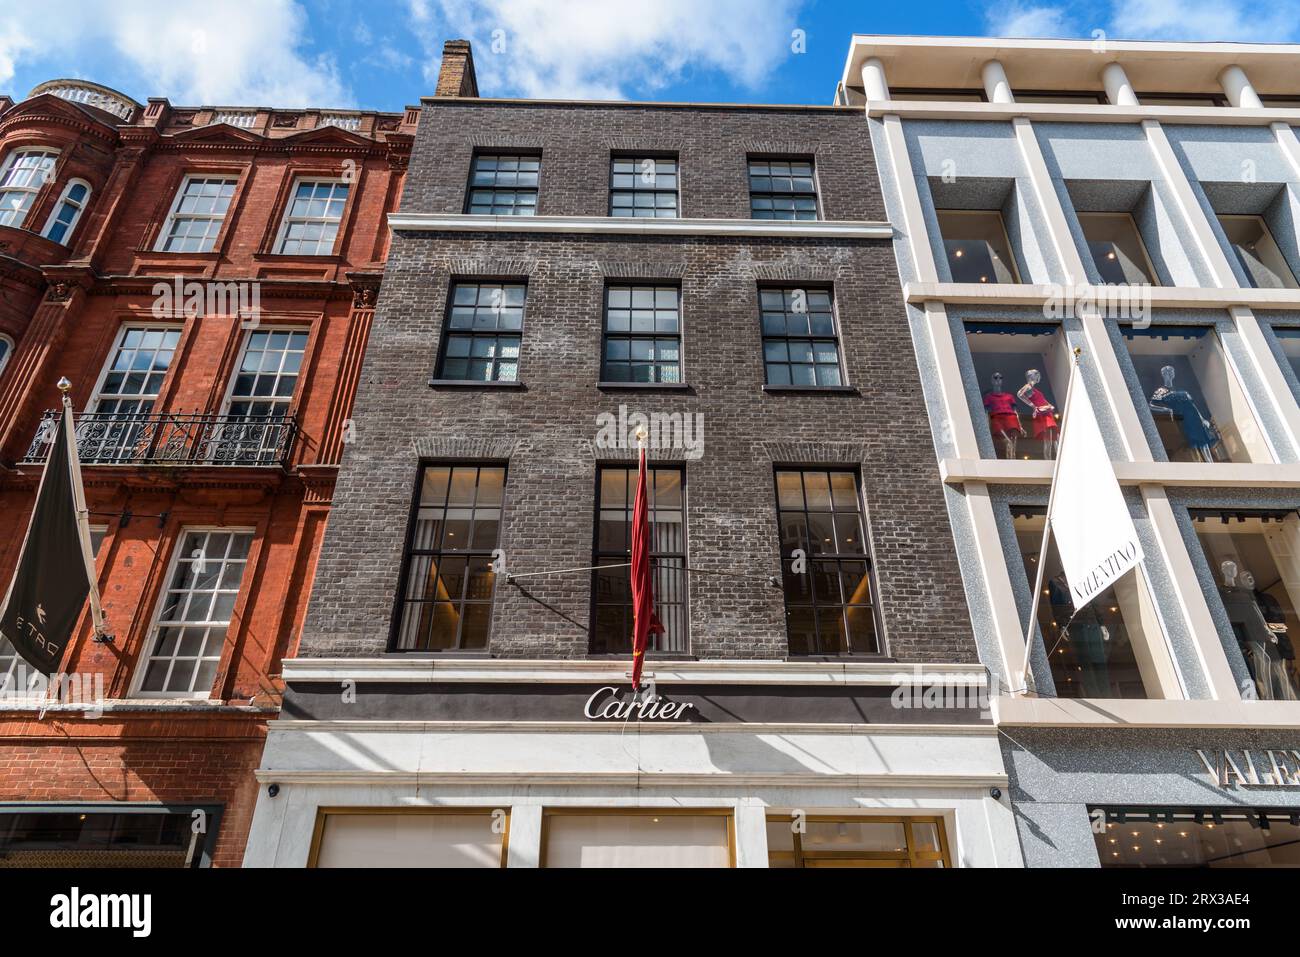 London, UK - August 27, 2023: Cartier luxury goods and jewellery store in Bond Street in the West End. It is one of the most expensive and sought afte Stock Photo